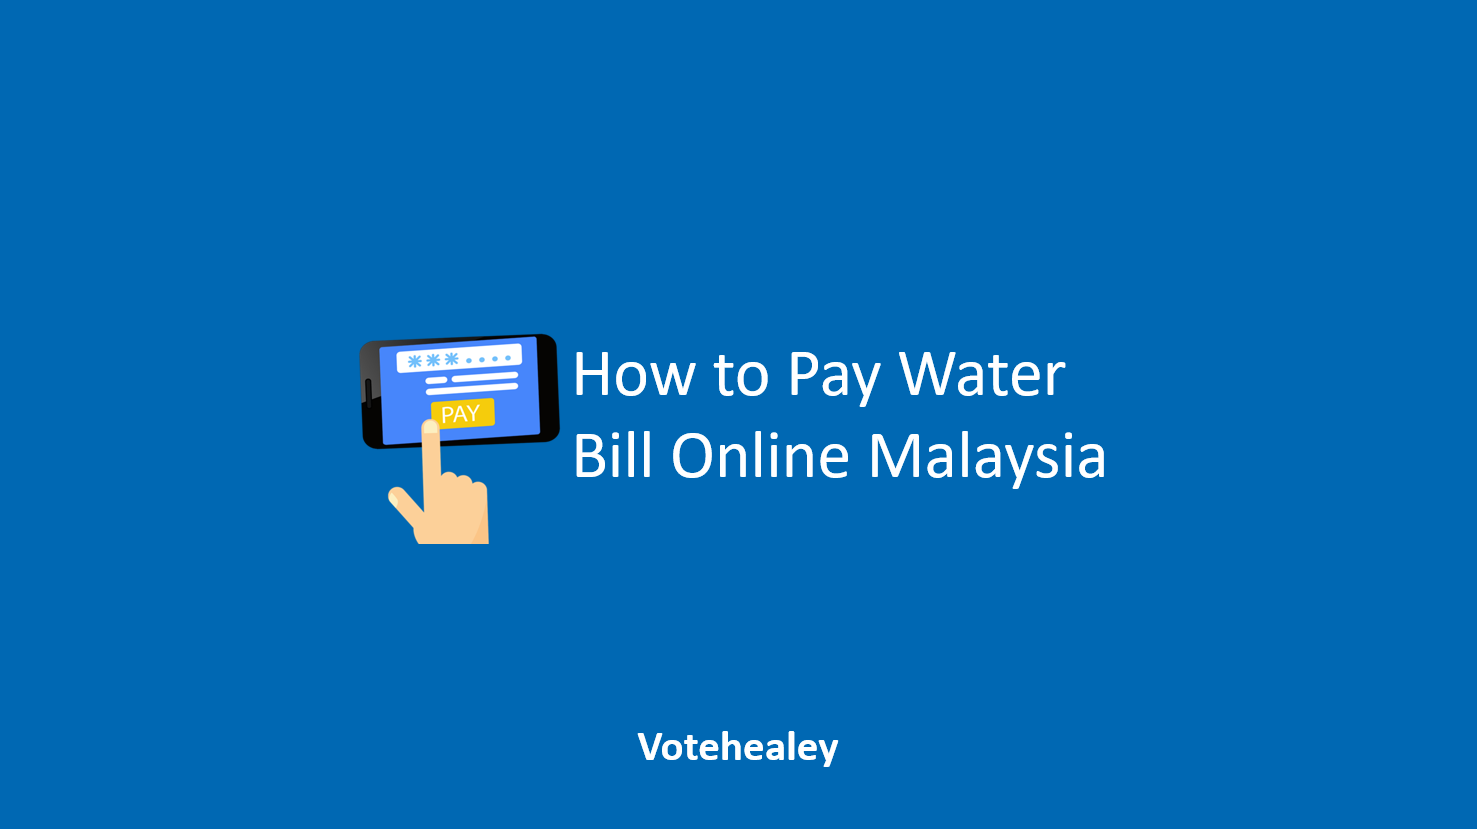 How to Pay Water Bill Online Malaysia